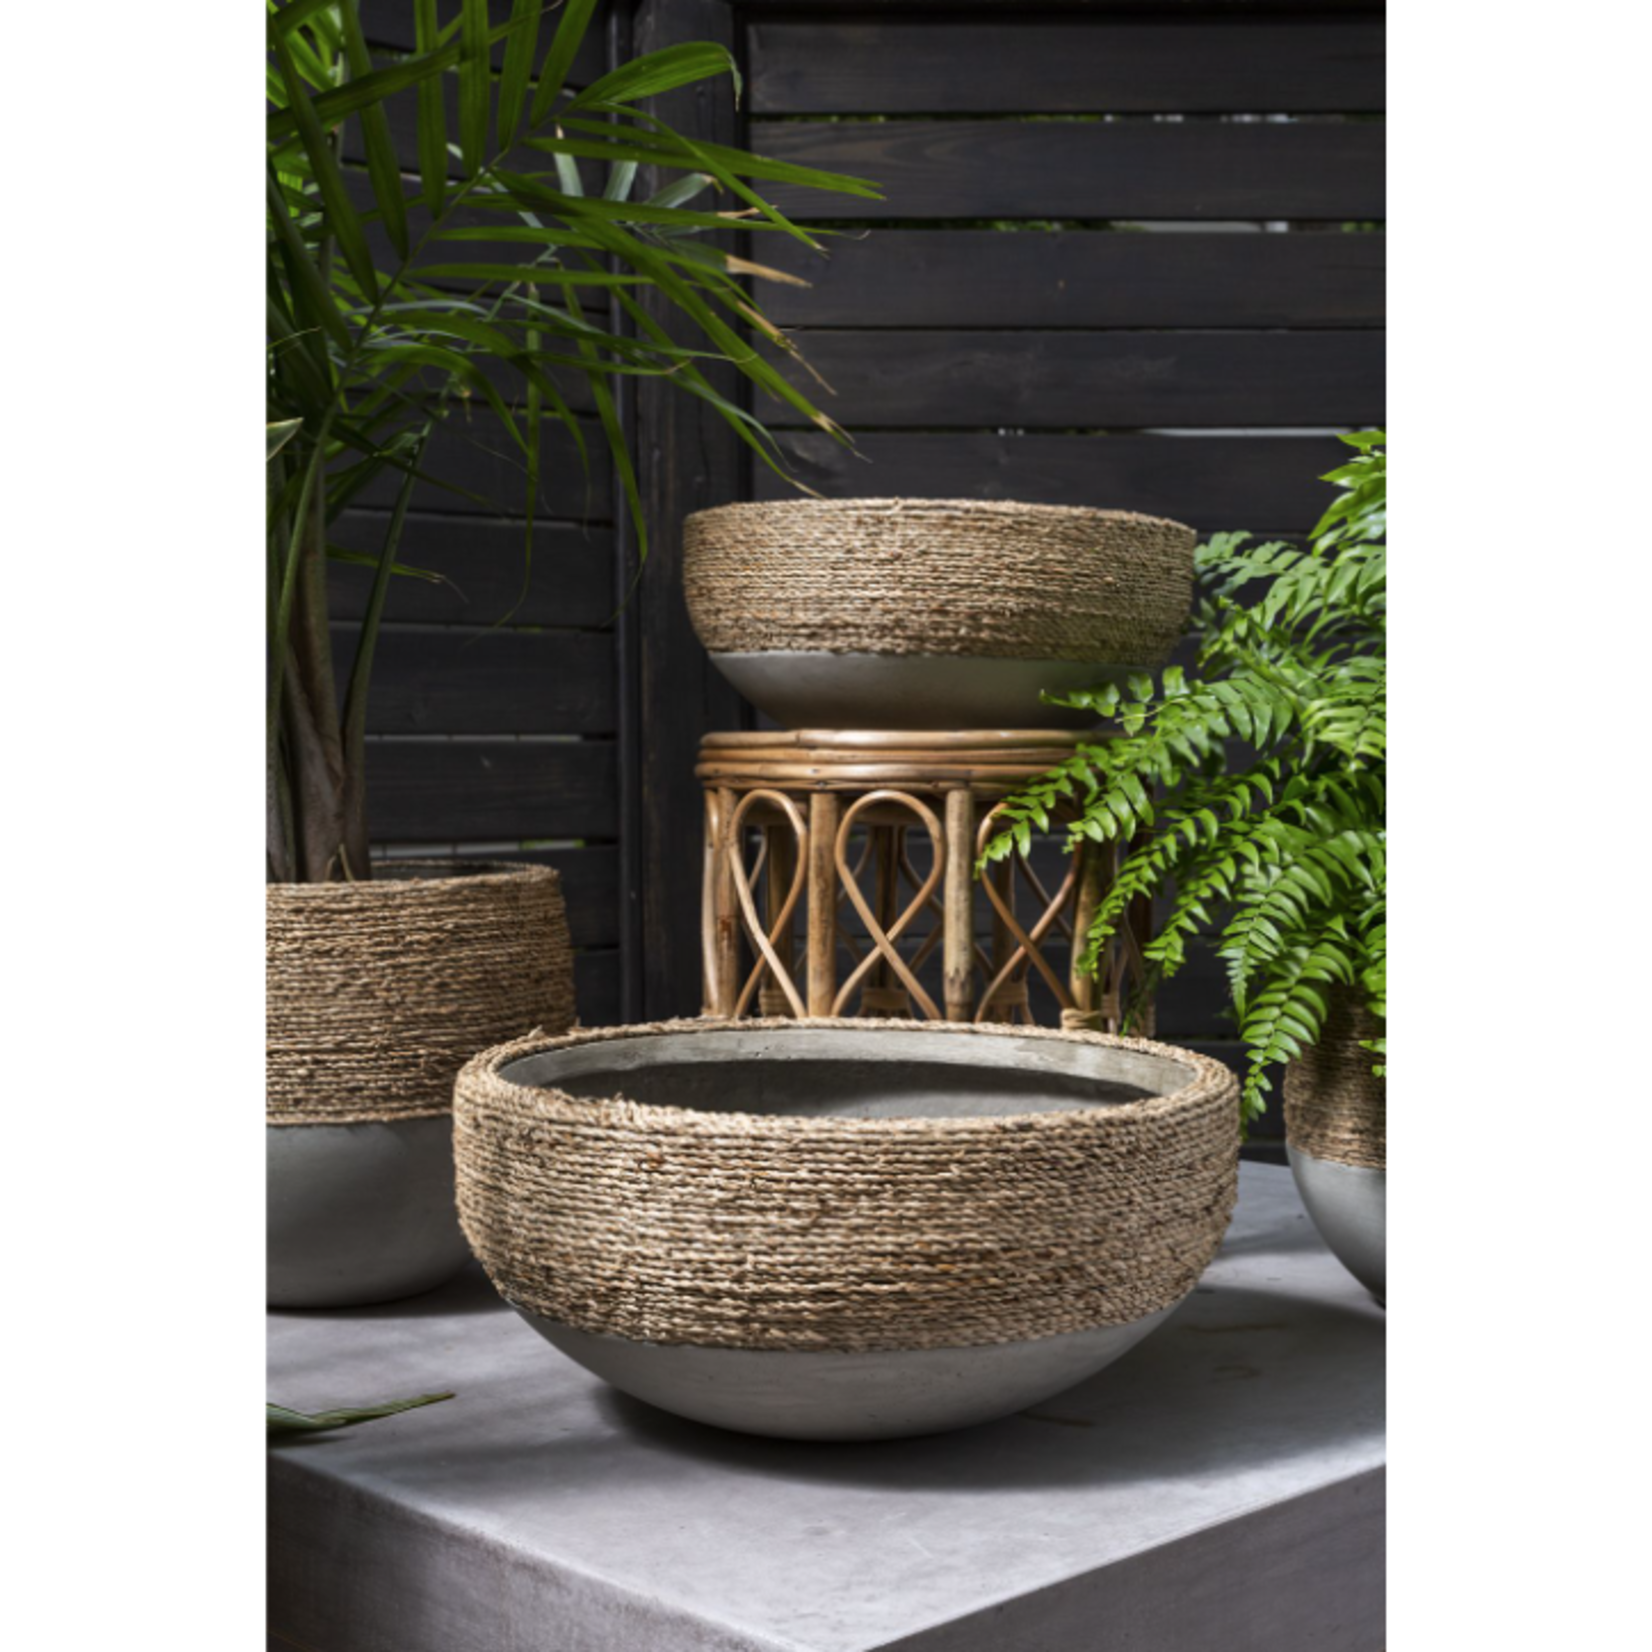 6.5”H X 14” CONCRETE REED BOWL WITH NATURAL ROPE